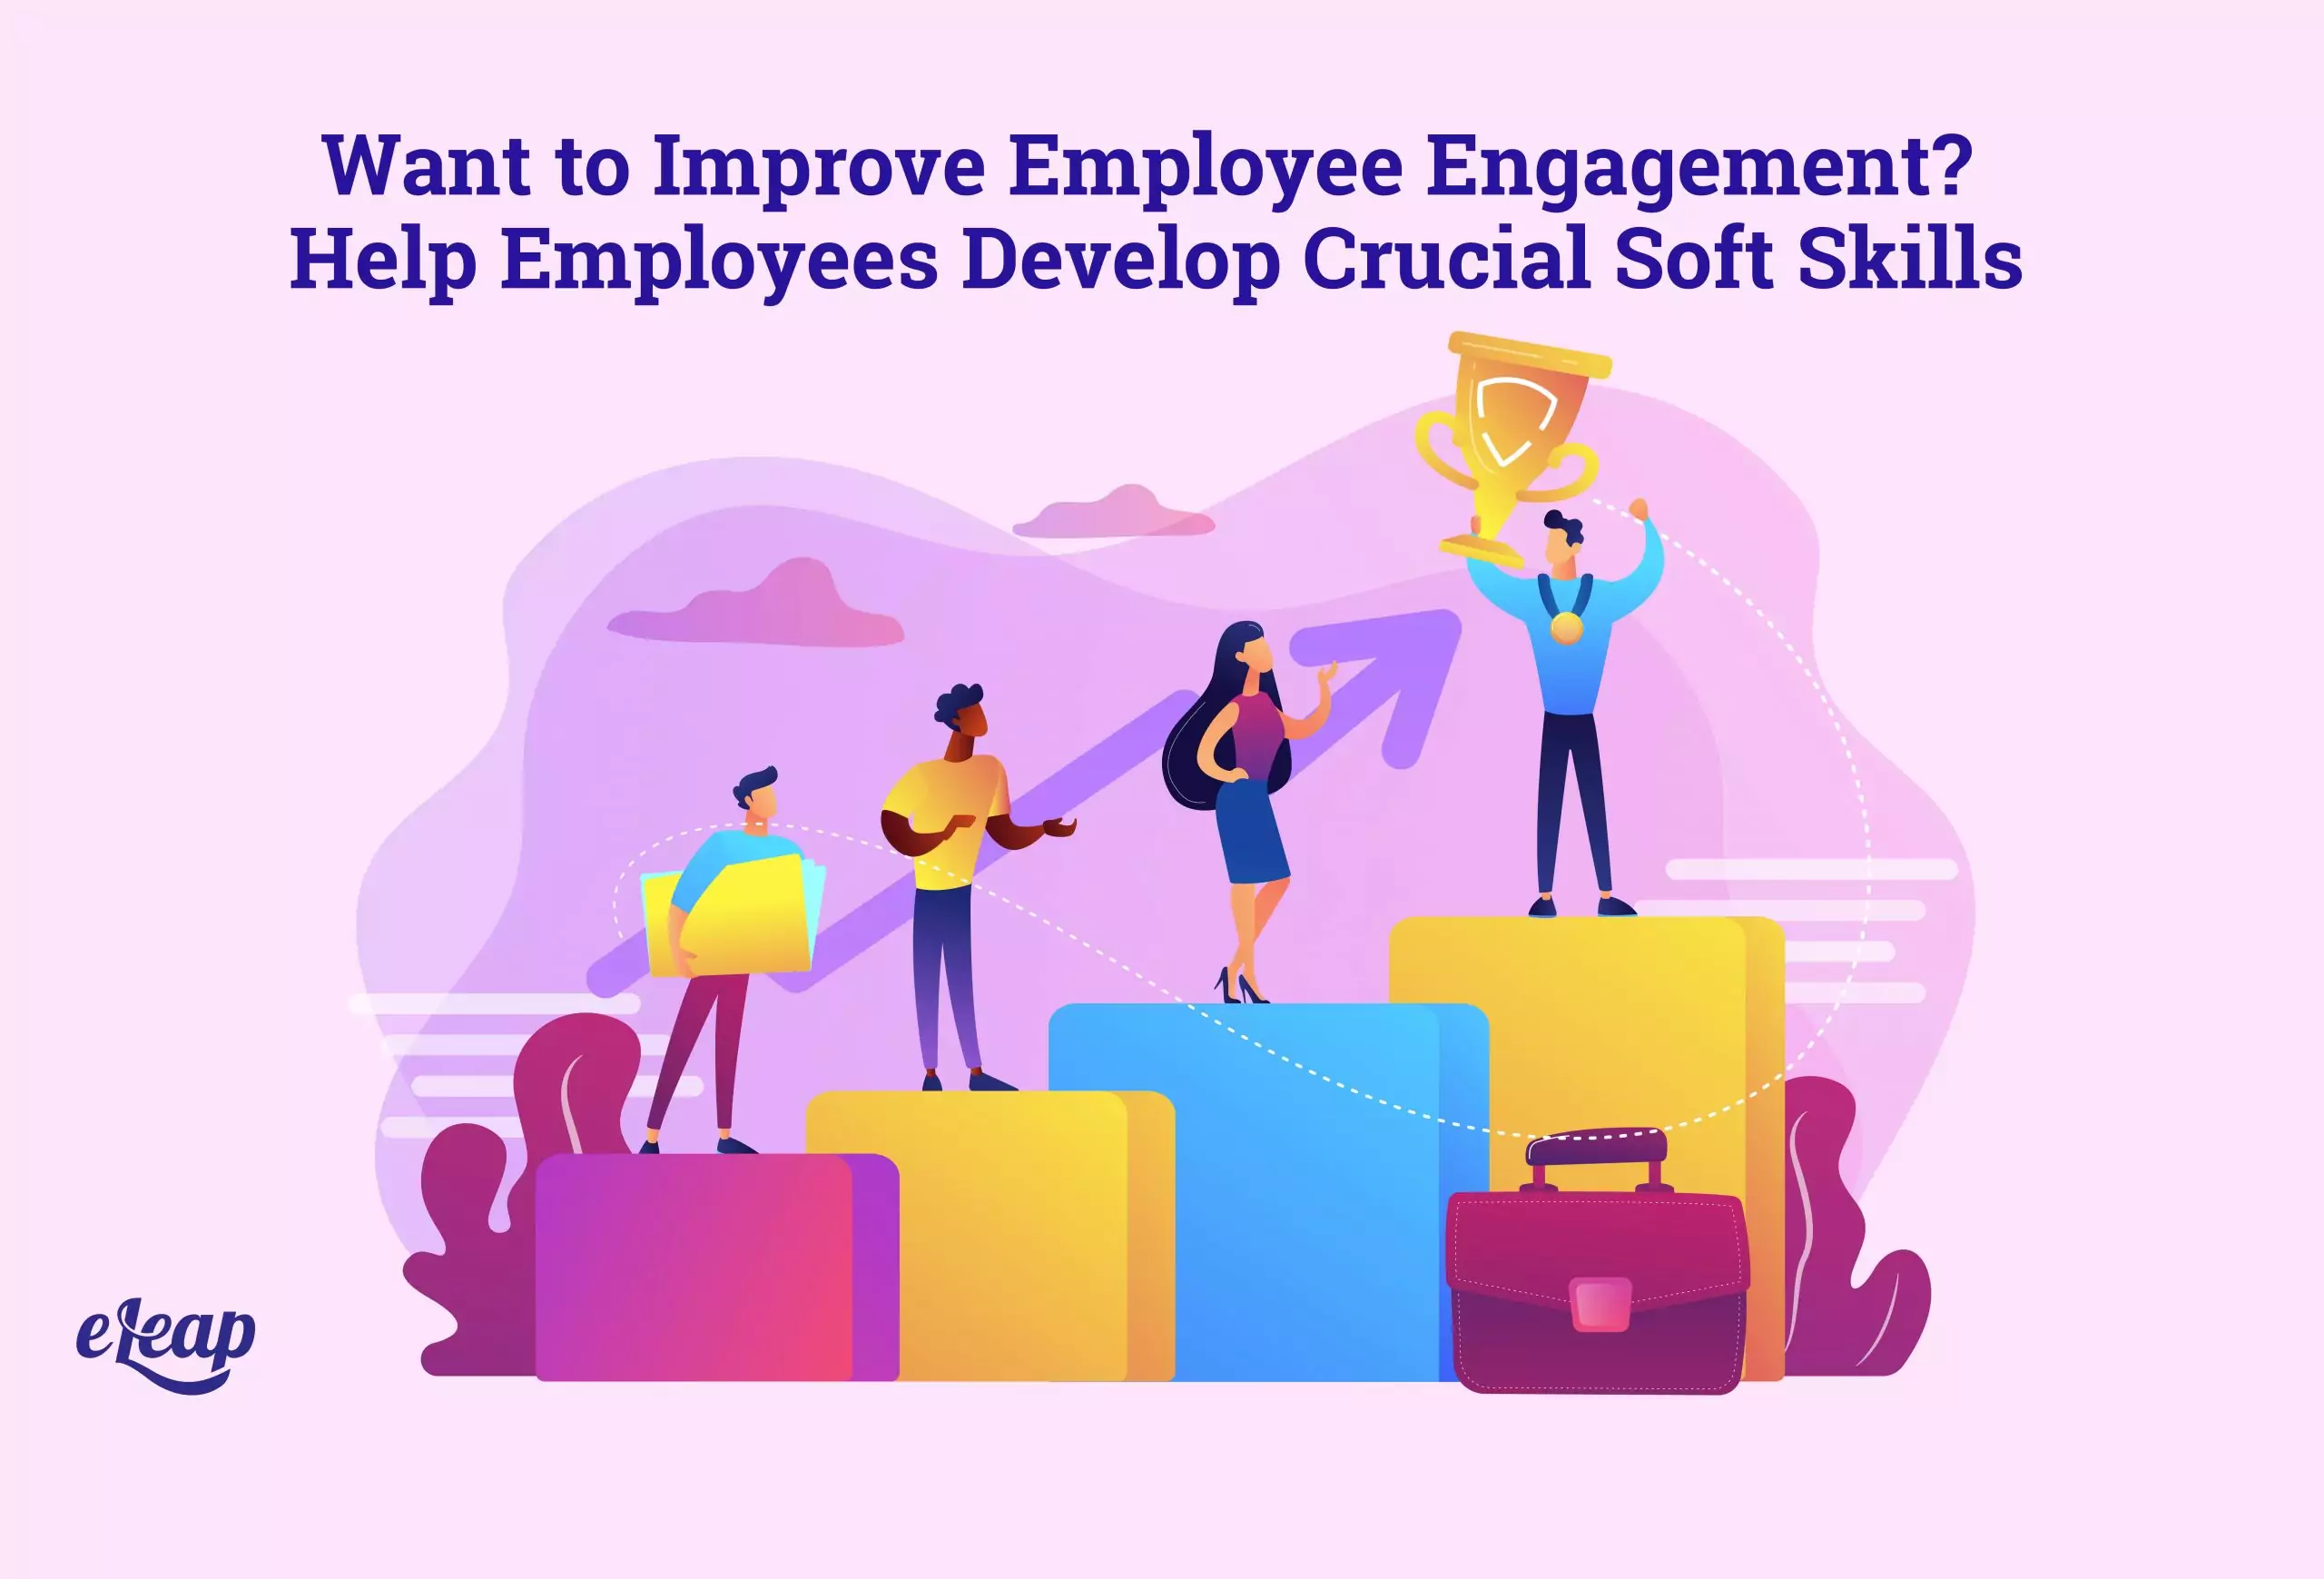 Want to Improve Employee Engagement? Help Employees Develop Crucial Soft Skills